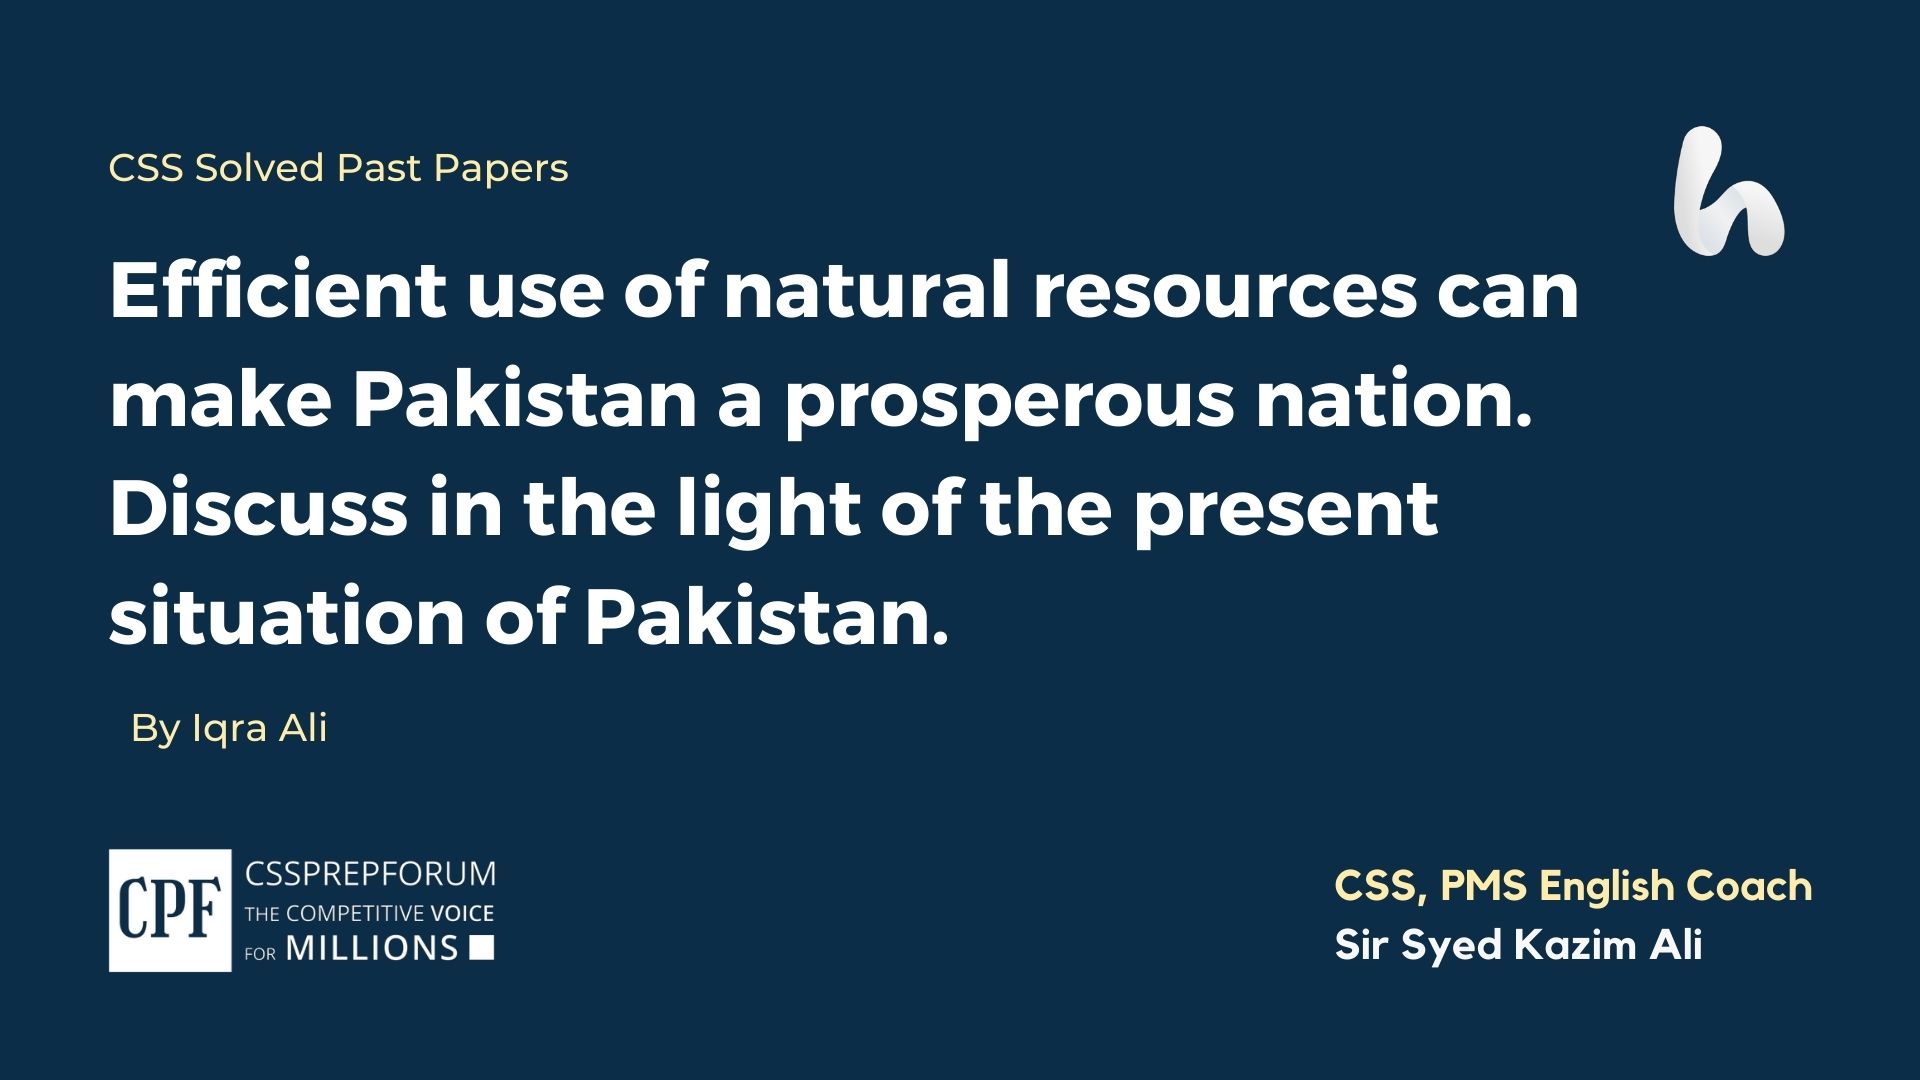 Efficient-use-of-natural-resources-can-make-Pakistan-a-prosperous-nation.-Discuss-in-the-light-of-the-present-situation-in-Pakistan